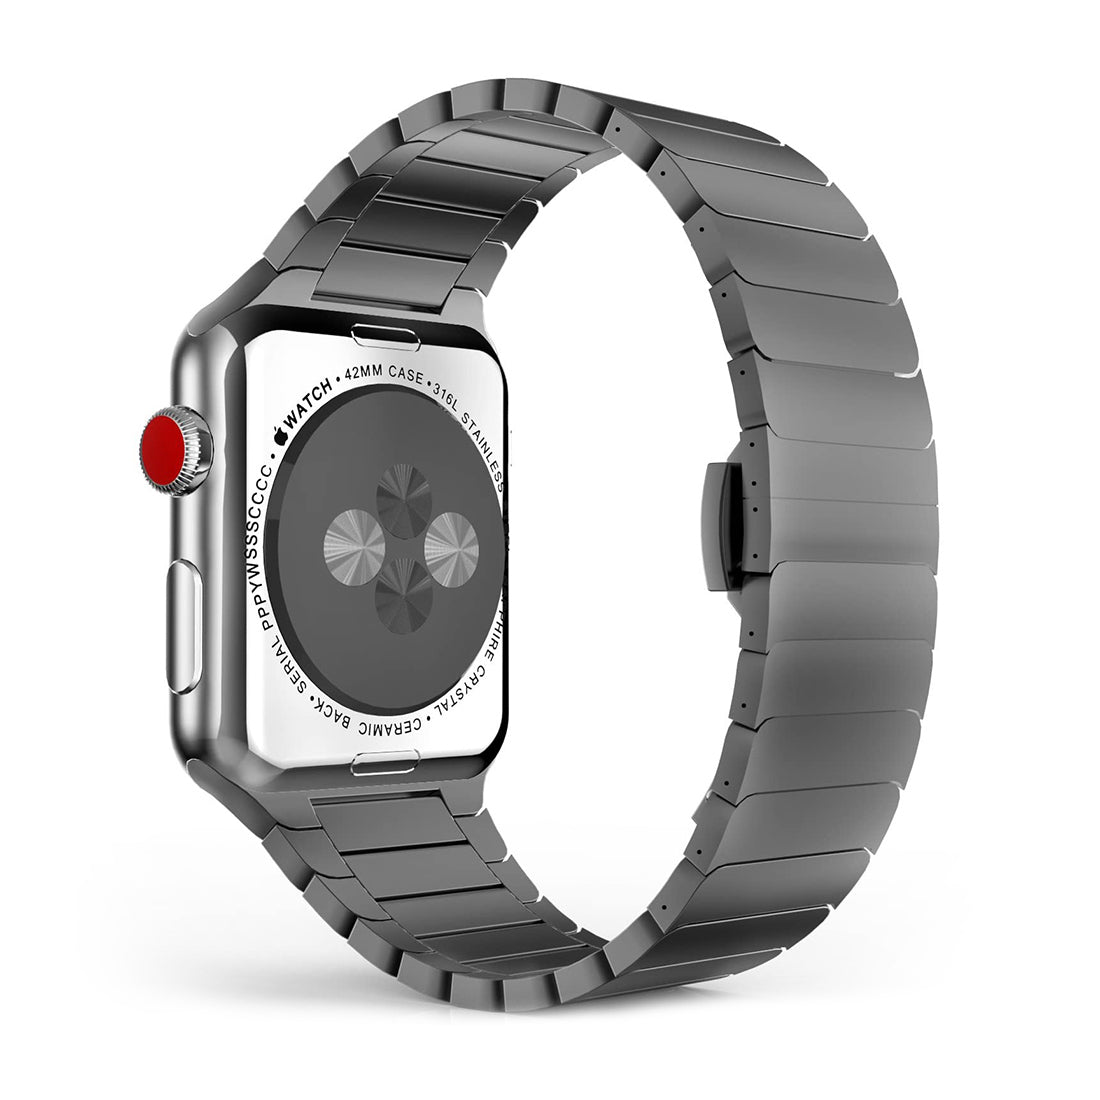 Classic Stainless Steel Bracelet Apple Watch Band.